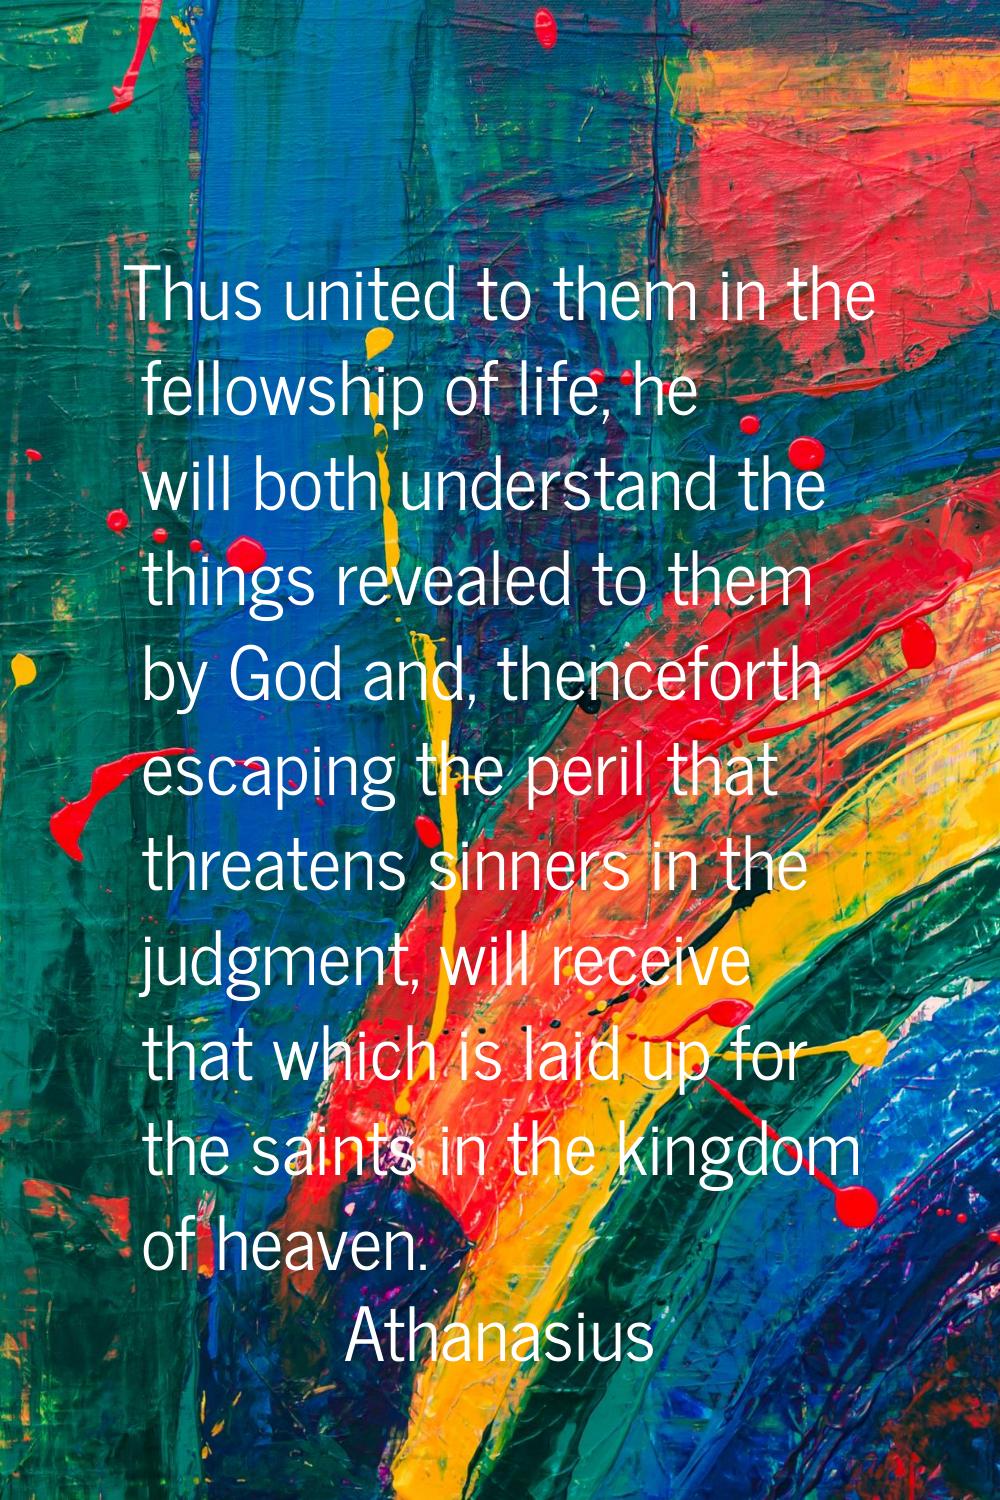 Thus united to them in the fellowship of life, he will both understand the things revealed to them 